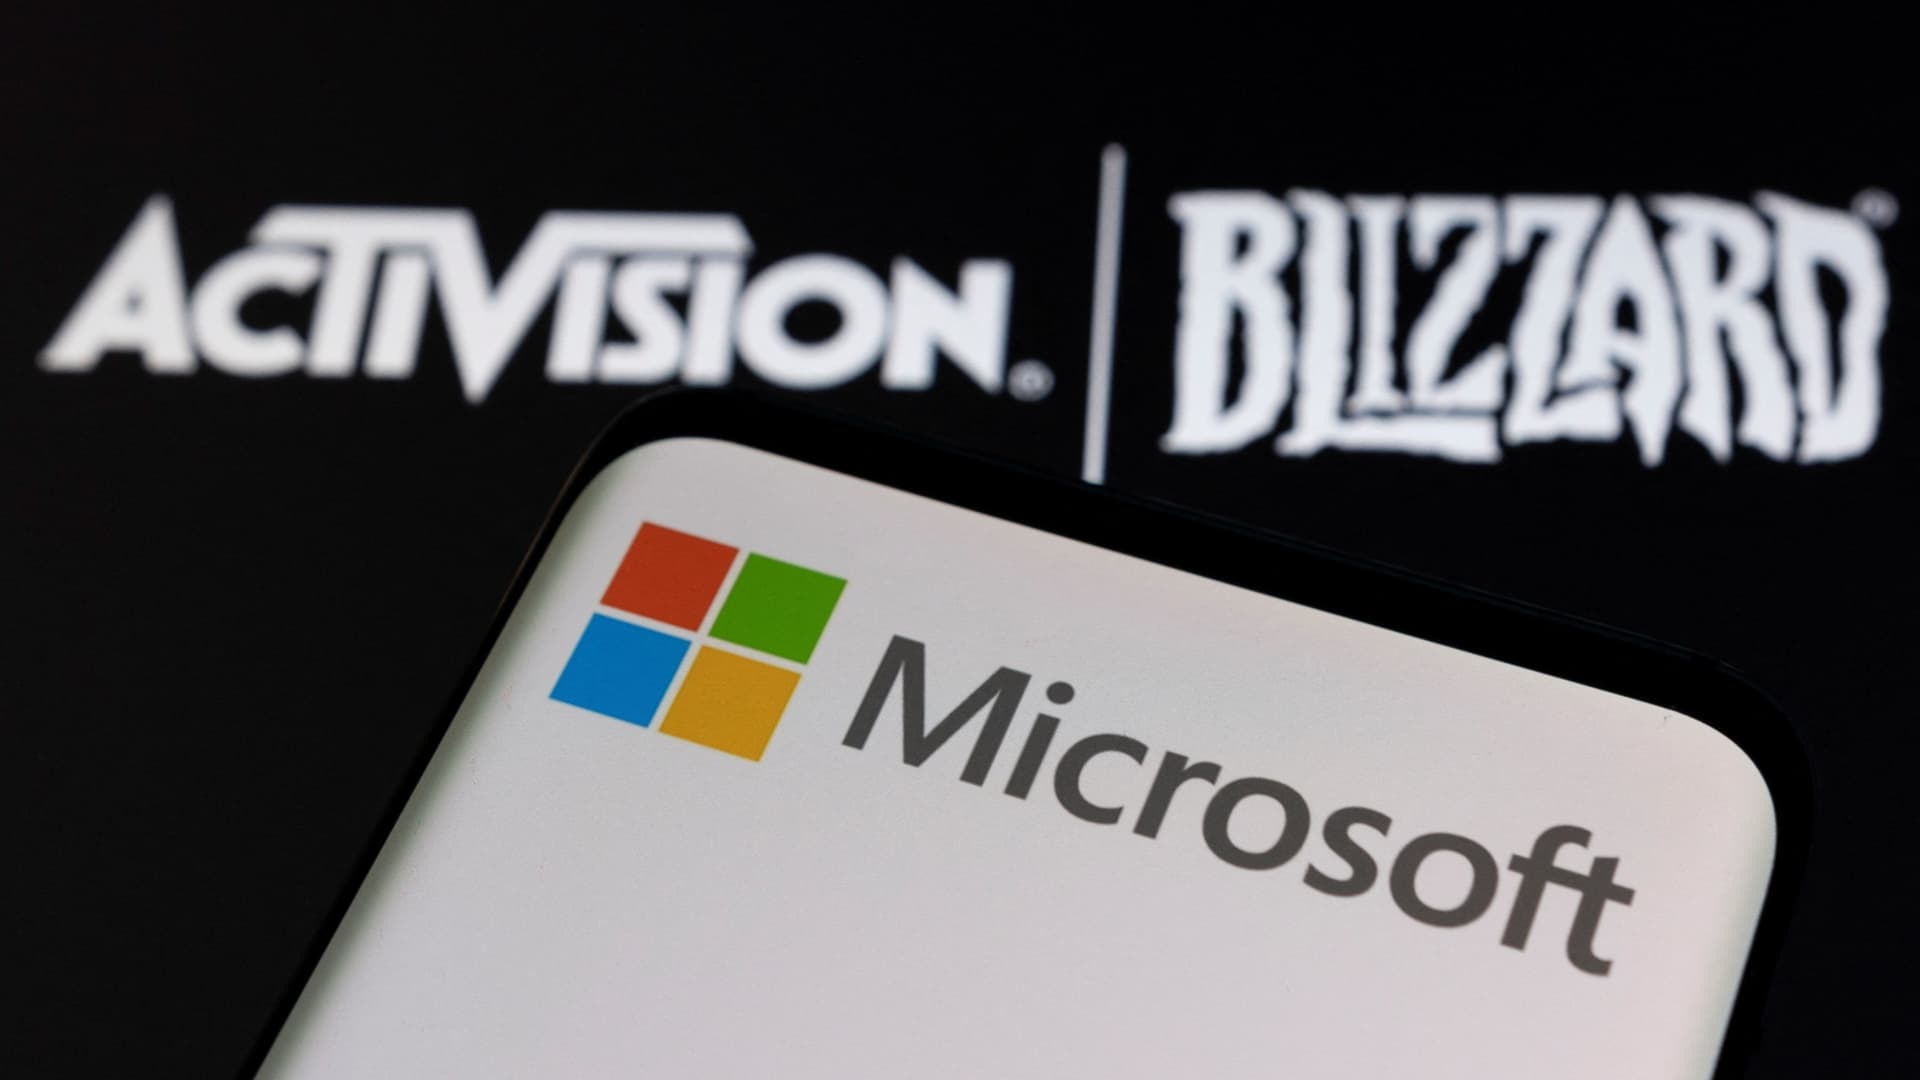 Microsoft’s $69 billion Activision Blizzard takeover approved by UK, clearing way for deal to close